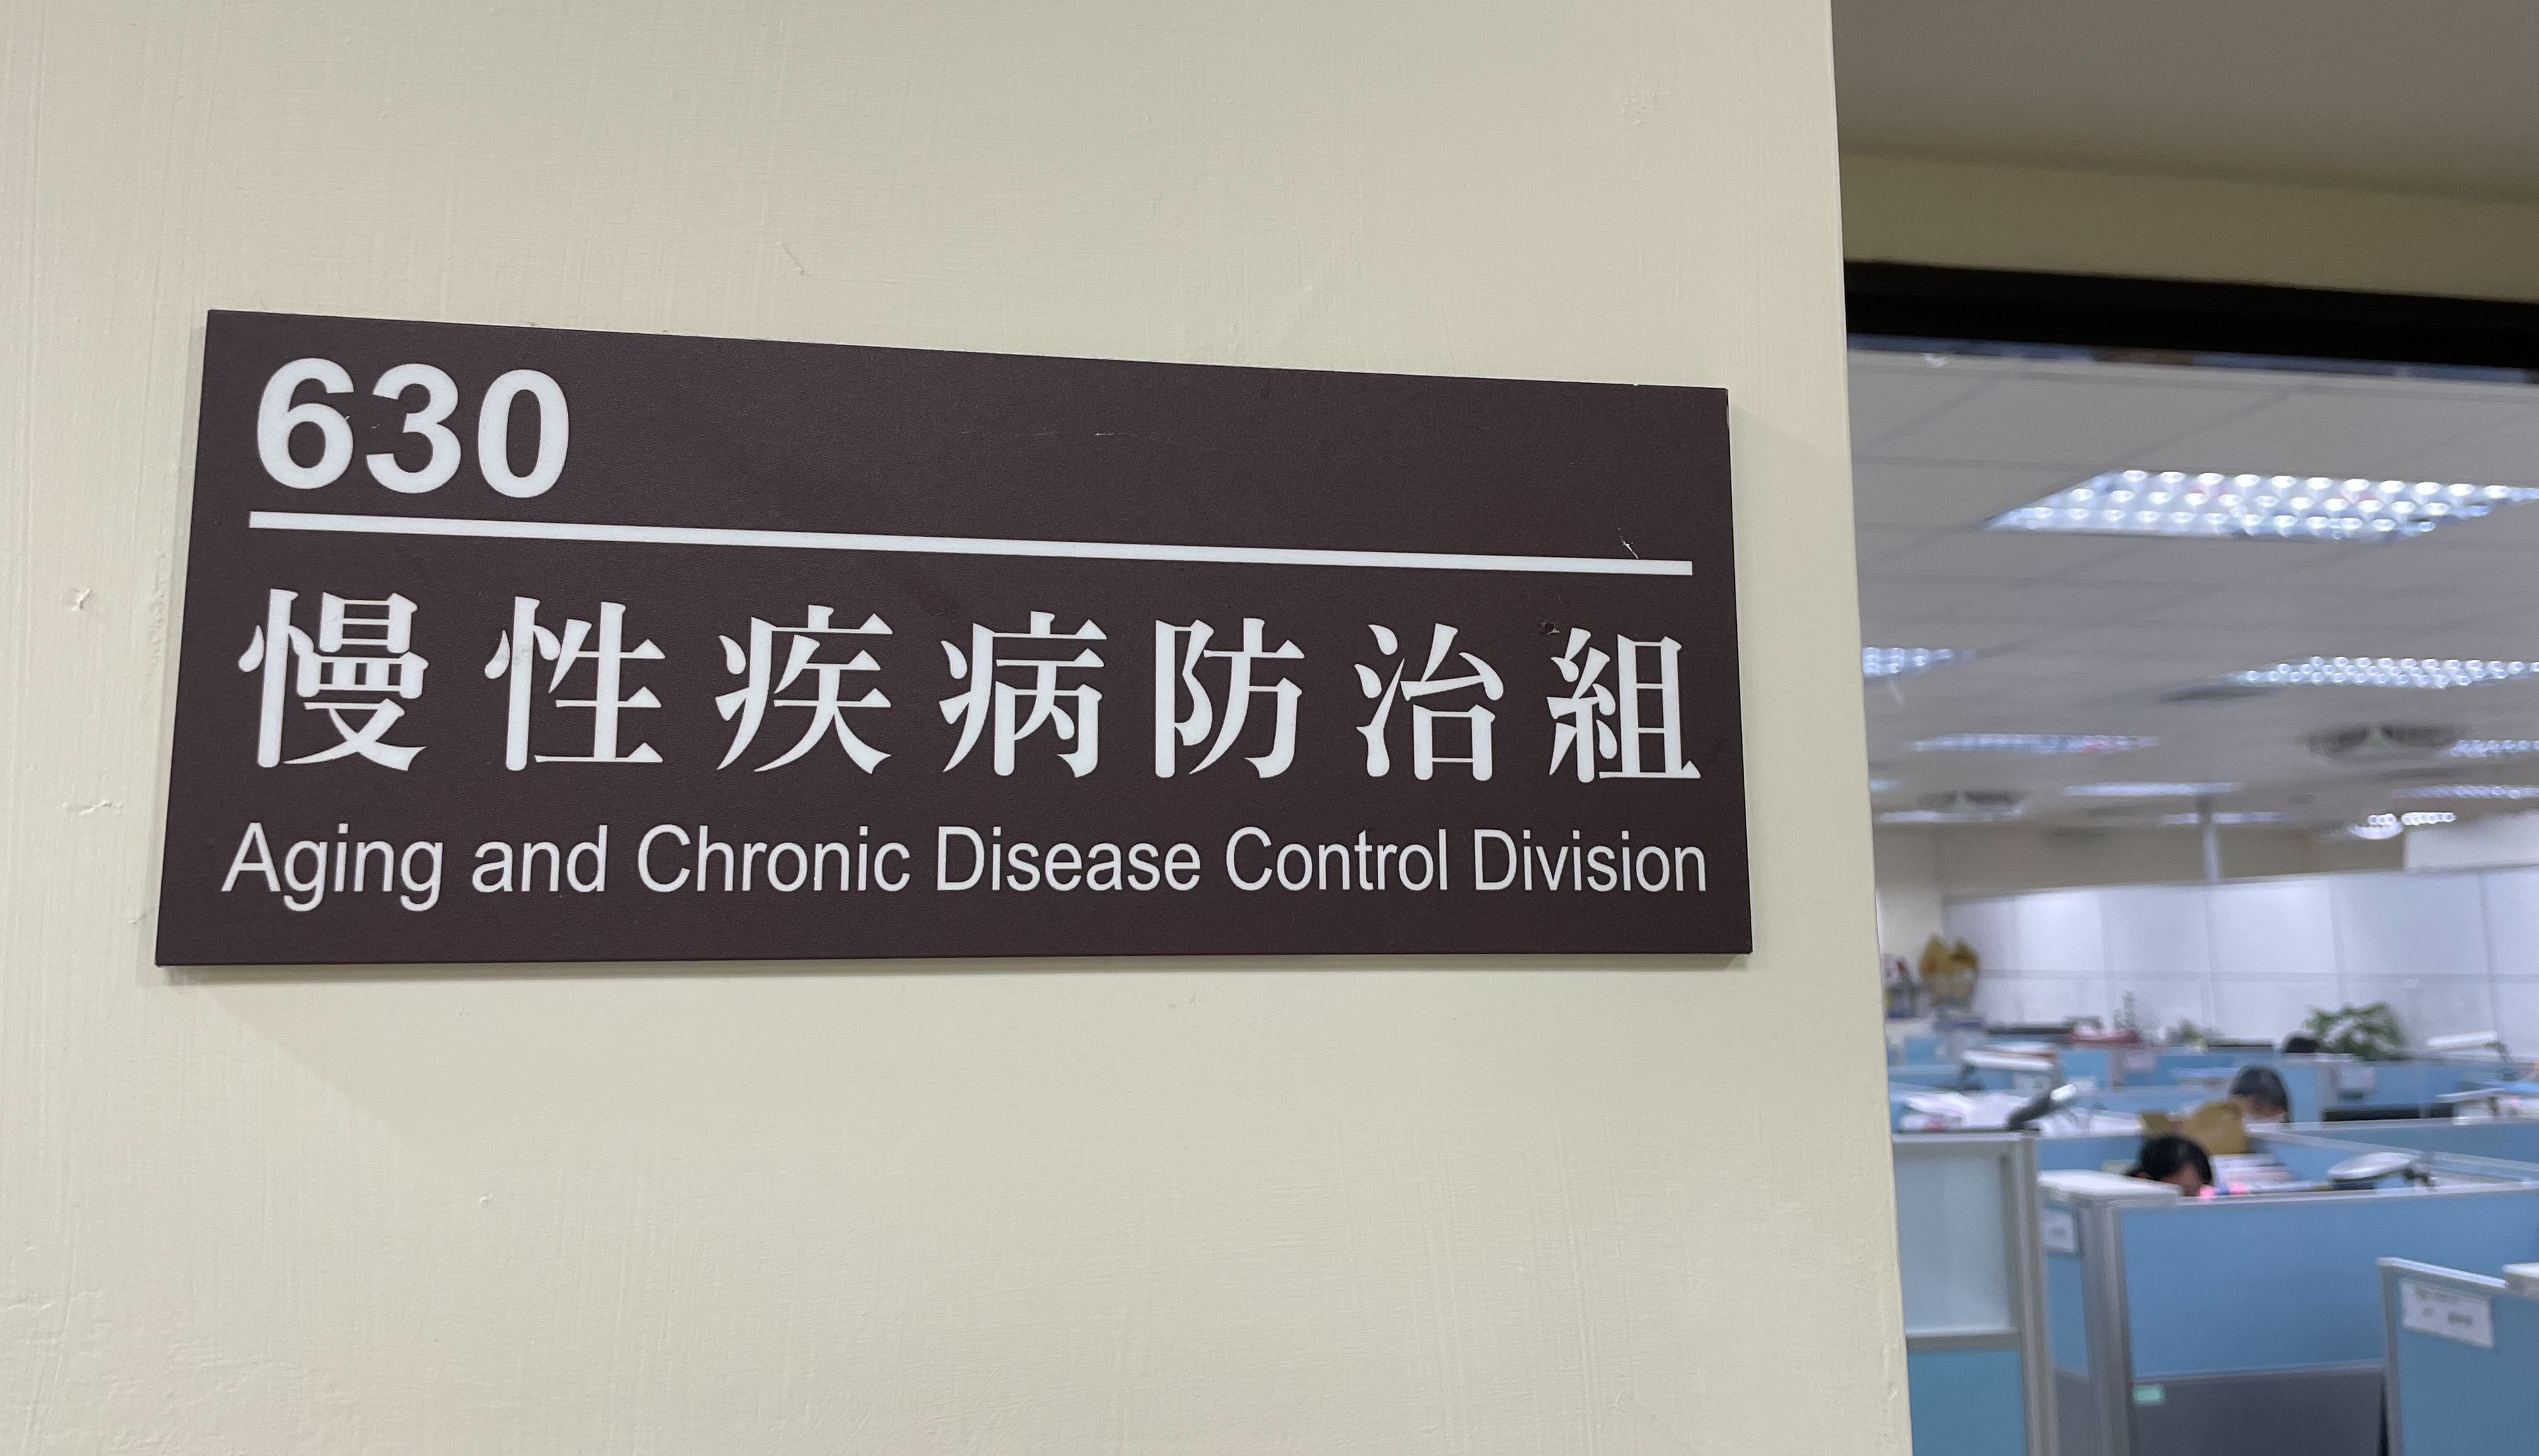 Aging and Chronic Disease Control Division